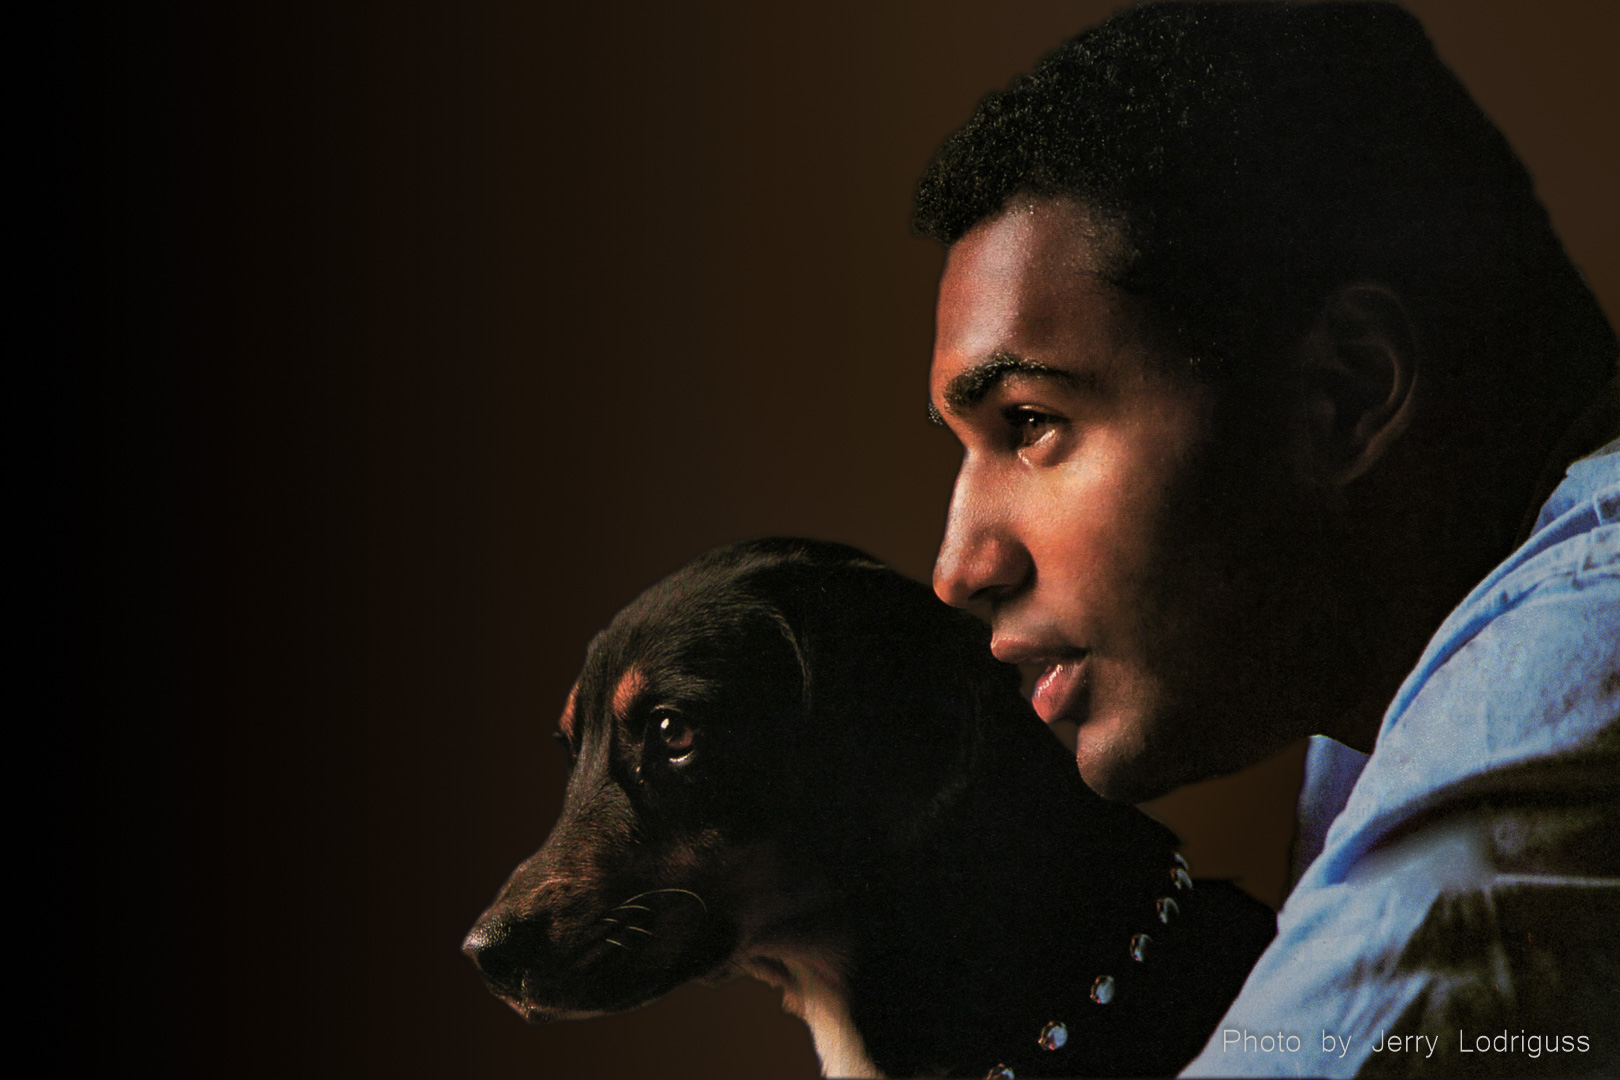 New Orleans Saints running back Rueben Mayes poses for a portrait with his pet dog at home in Metairie, La. Mayes won the NFL Offensive Rookie of the Year Award in 1986 and was named to the Pro Bowl twice during his pro career.